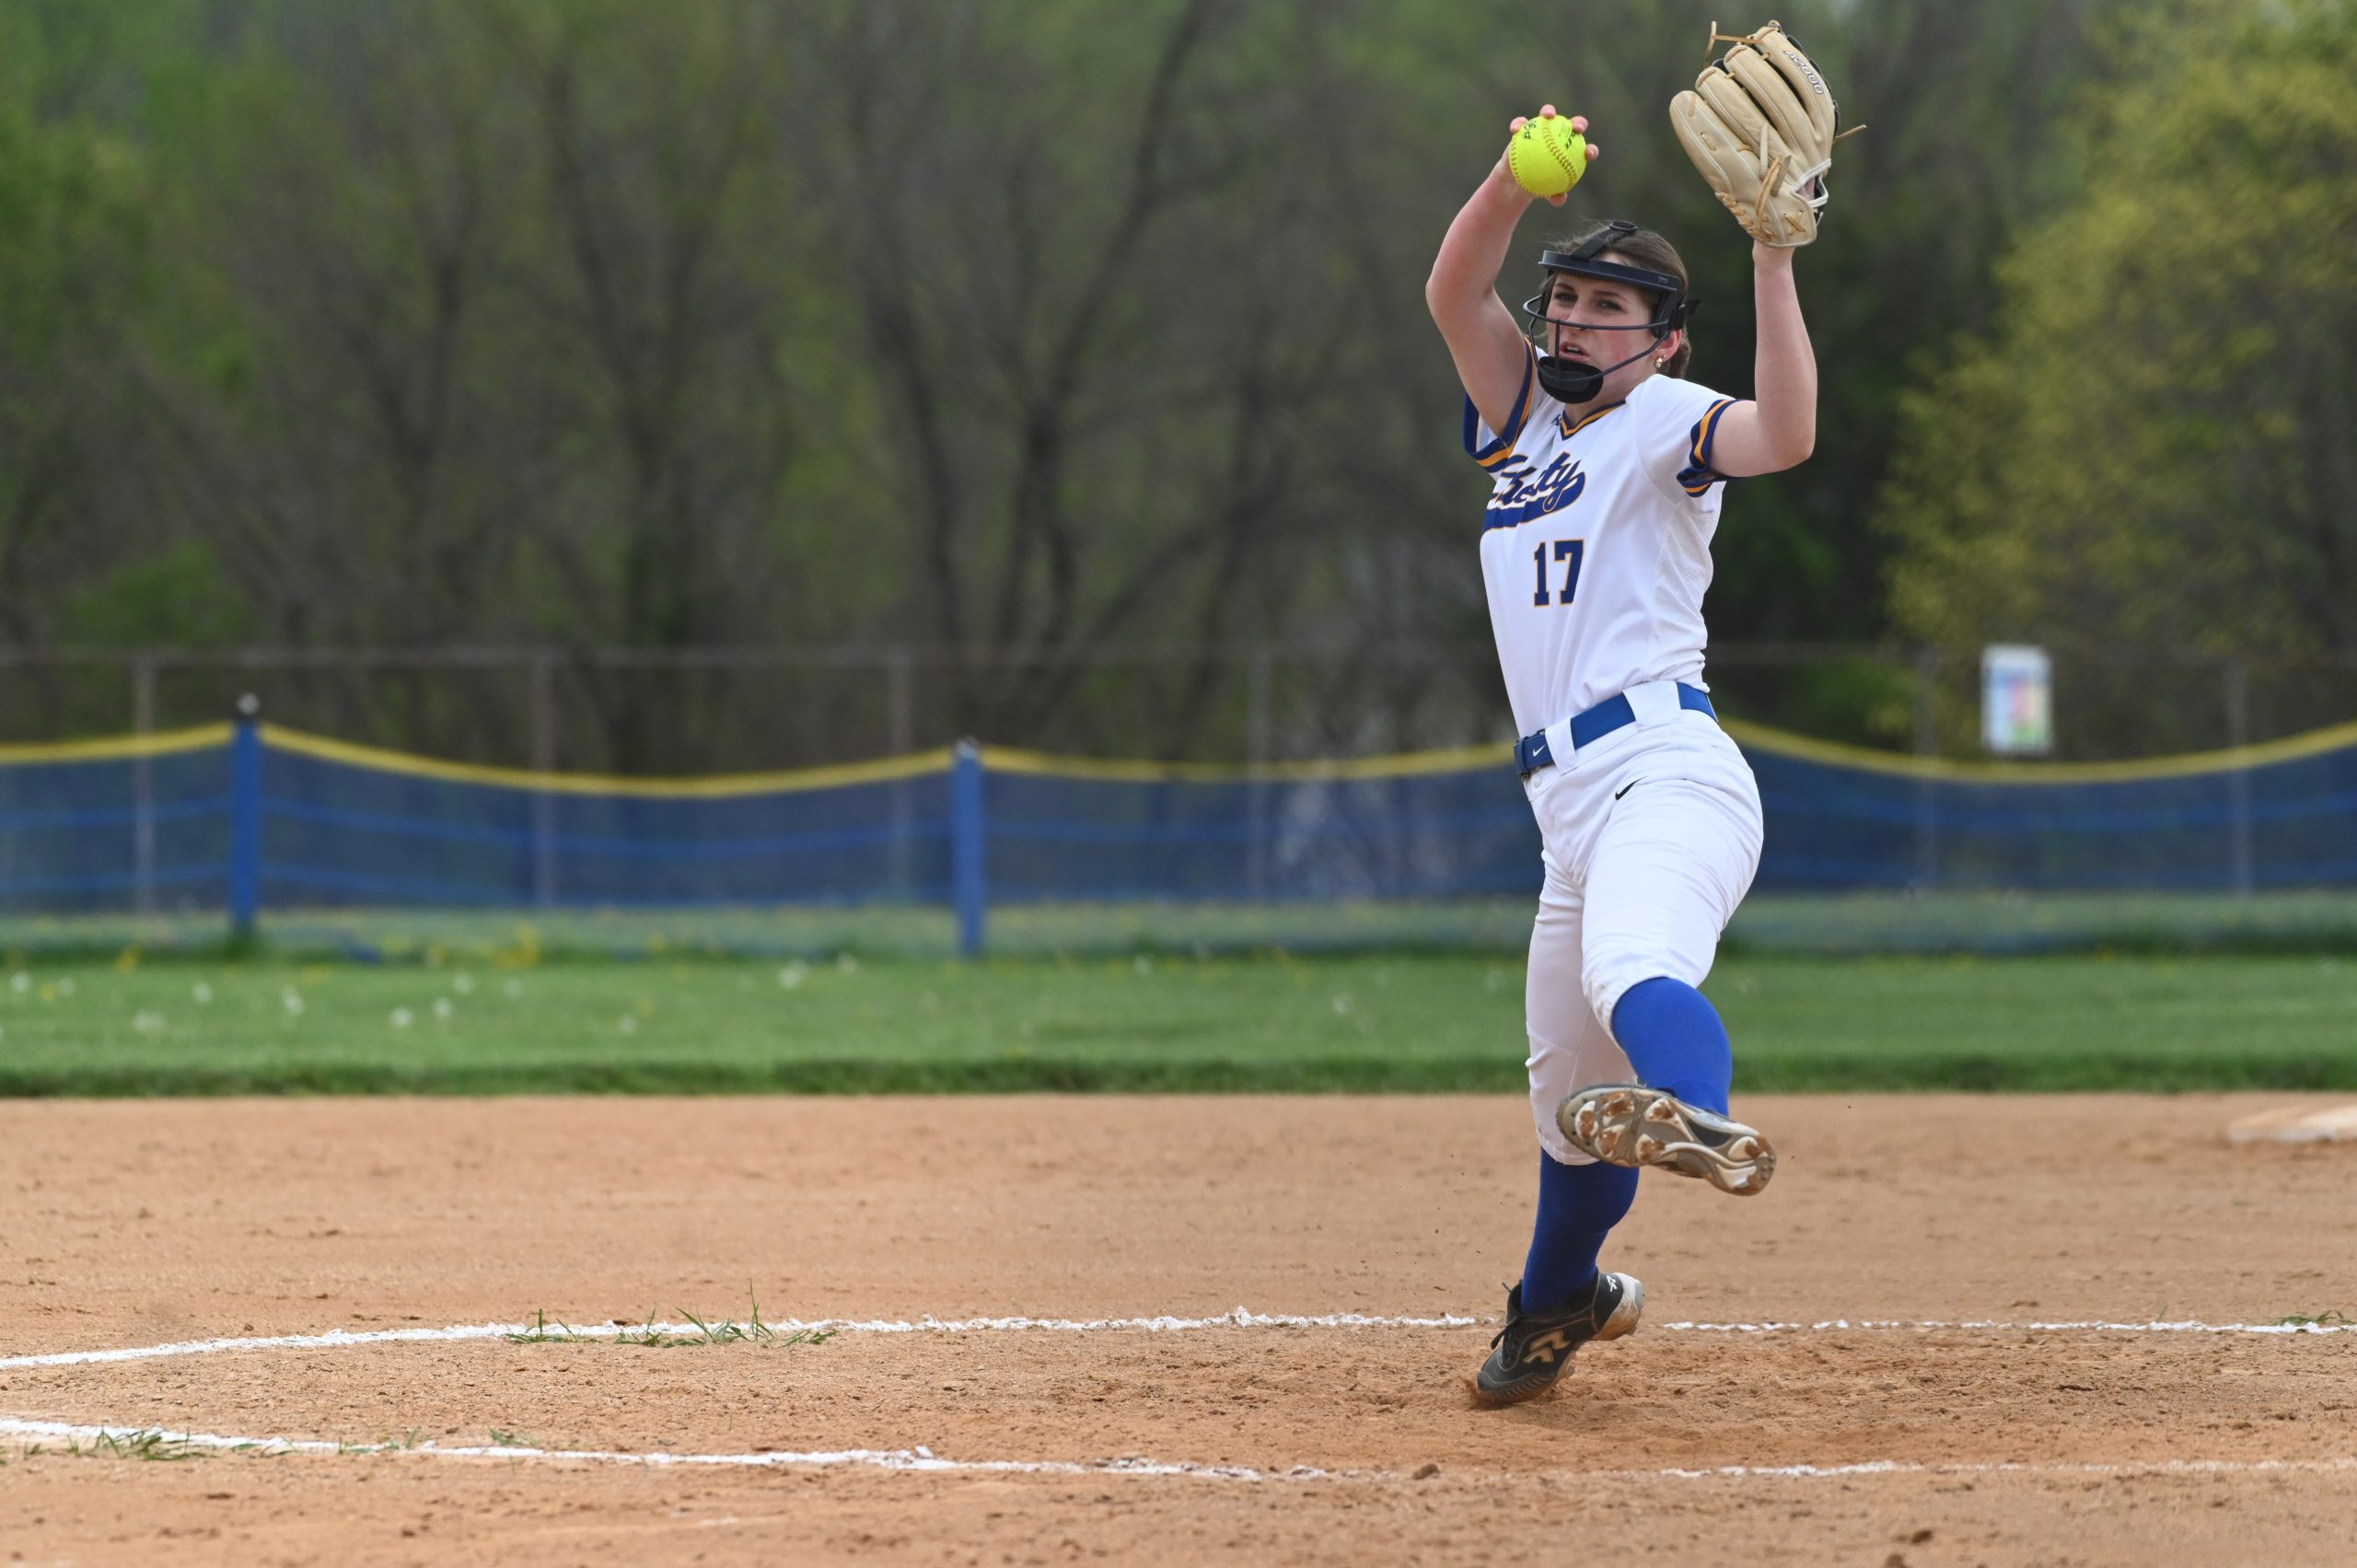 Liberty pitcher Sophia Steele winds up in her delivery to...